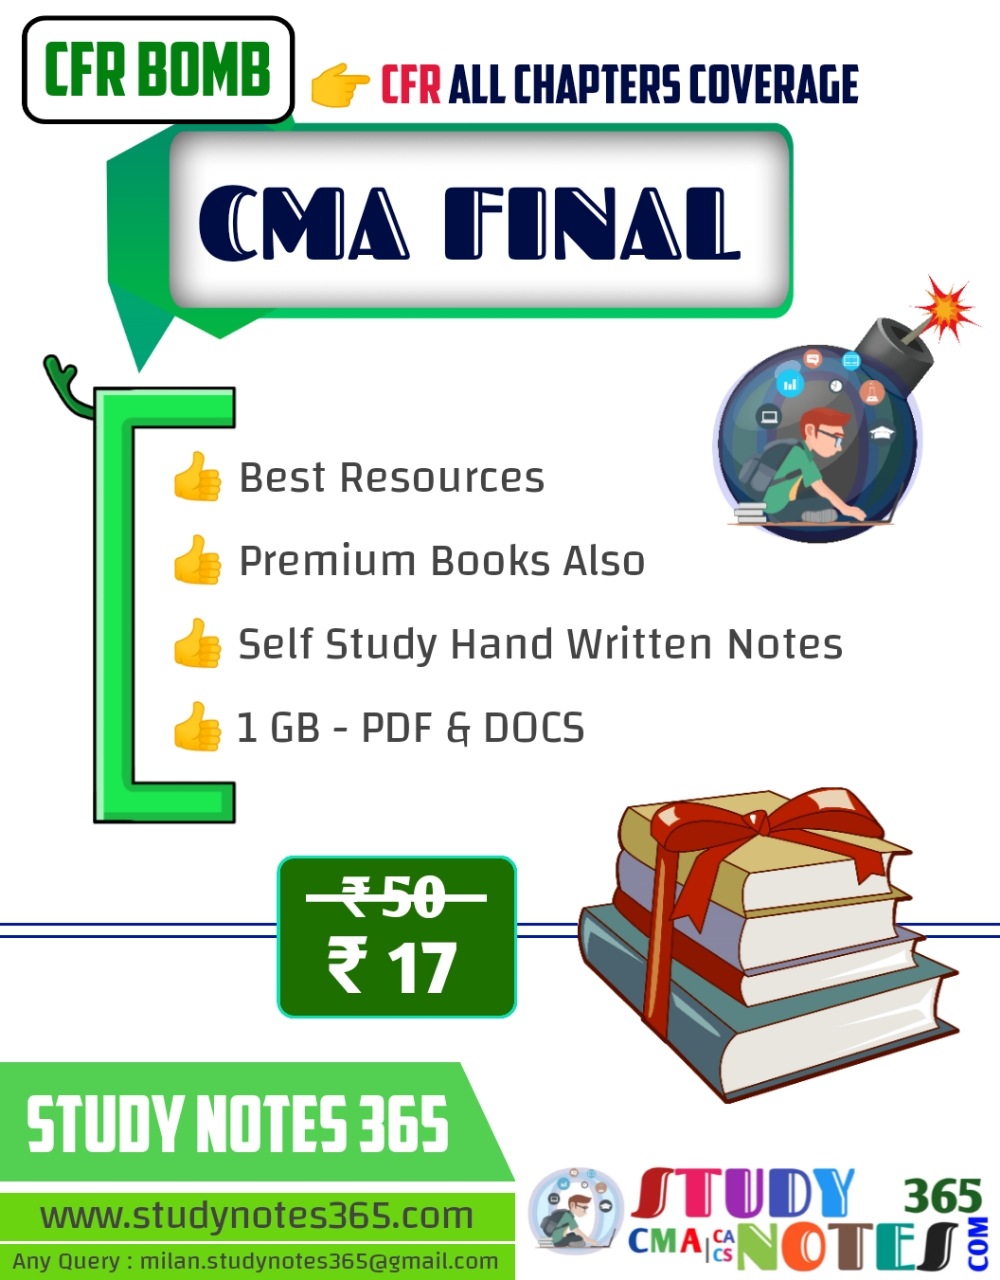 CFR BOMB for CMA Final » Study Notes 365